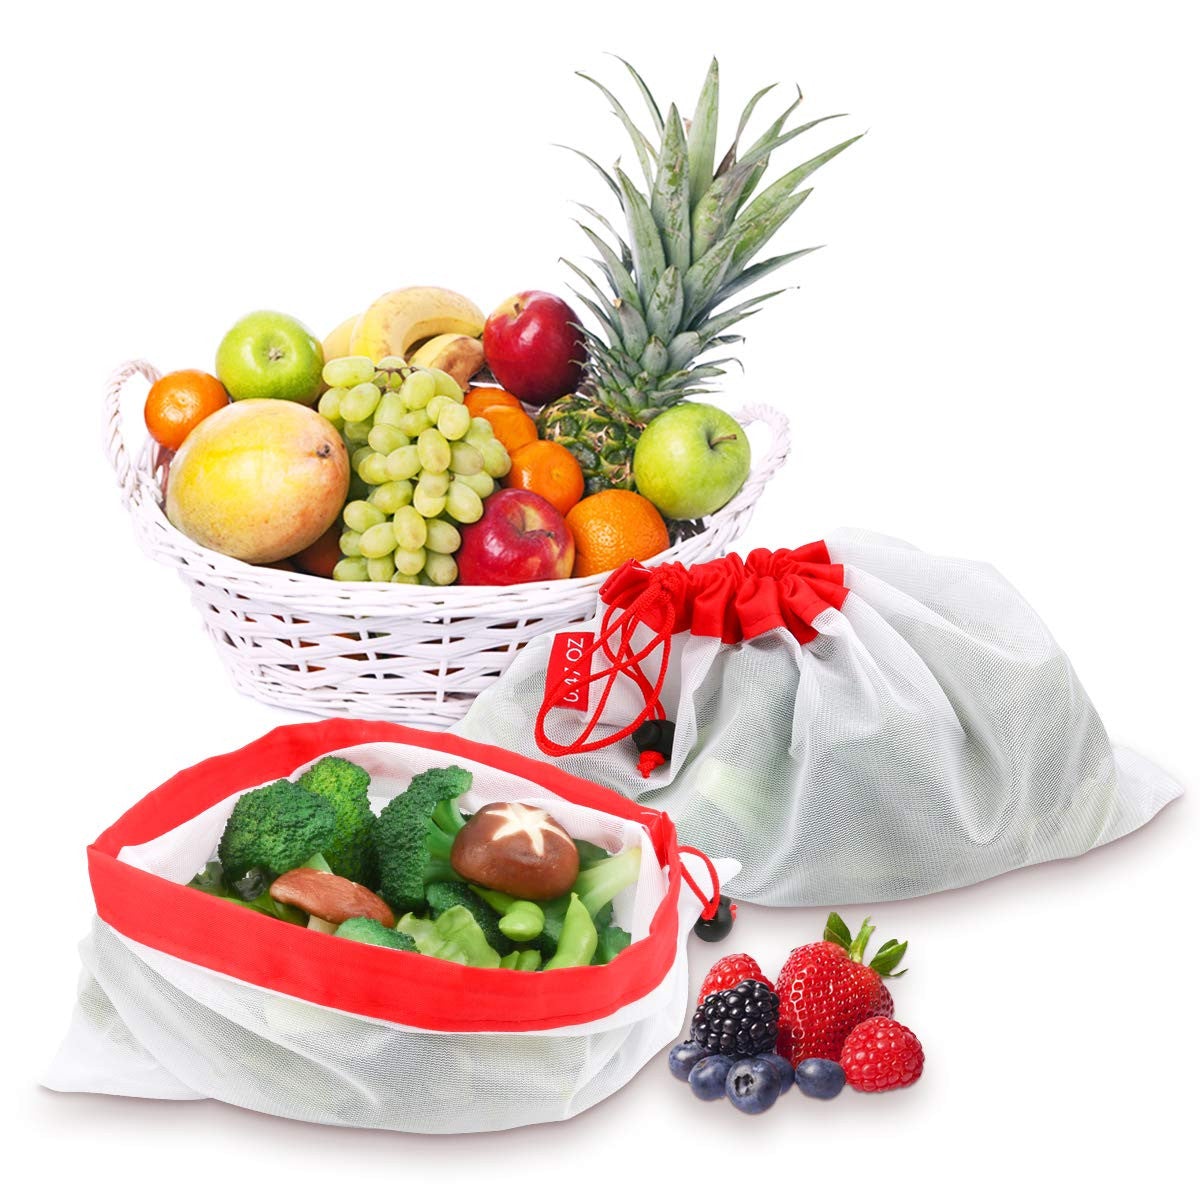 Image for two reusable grocery bags filled with fruits and vegetables placed next to a white plant based fruit basket.